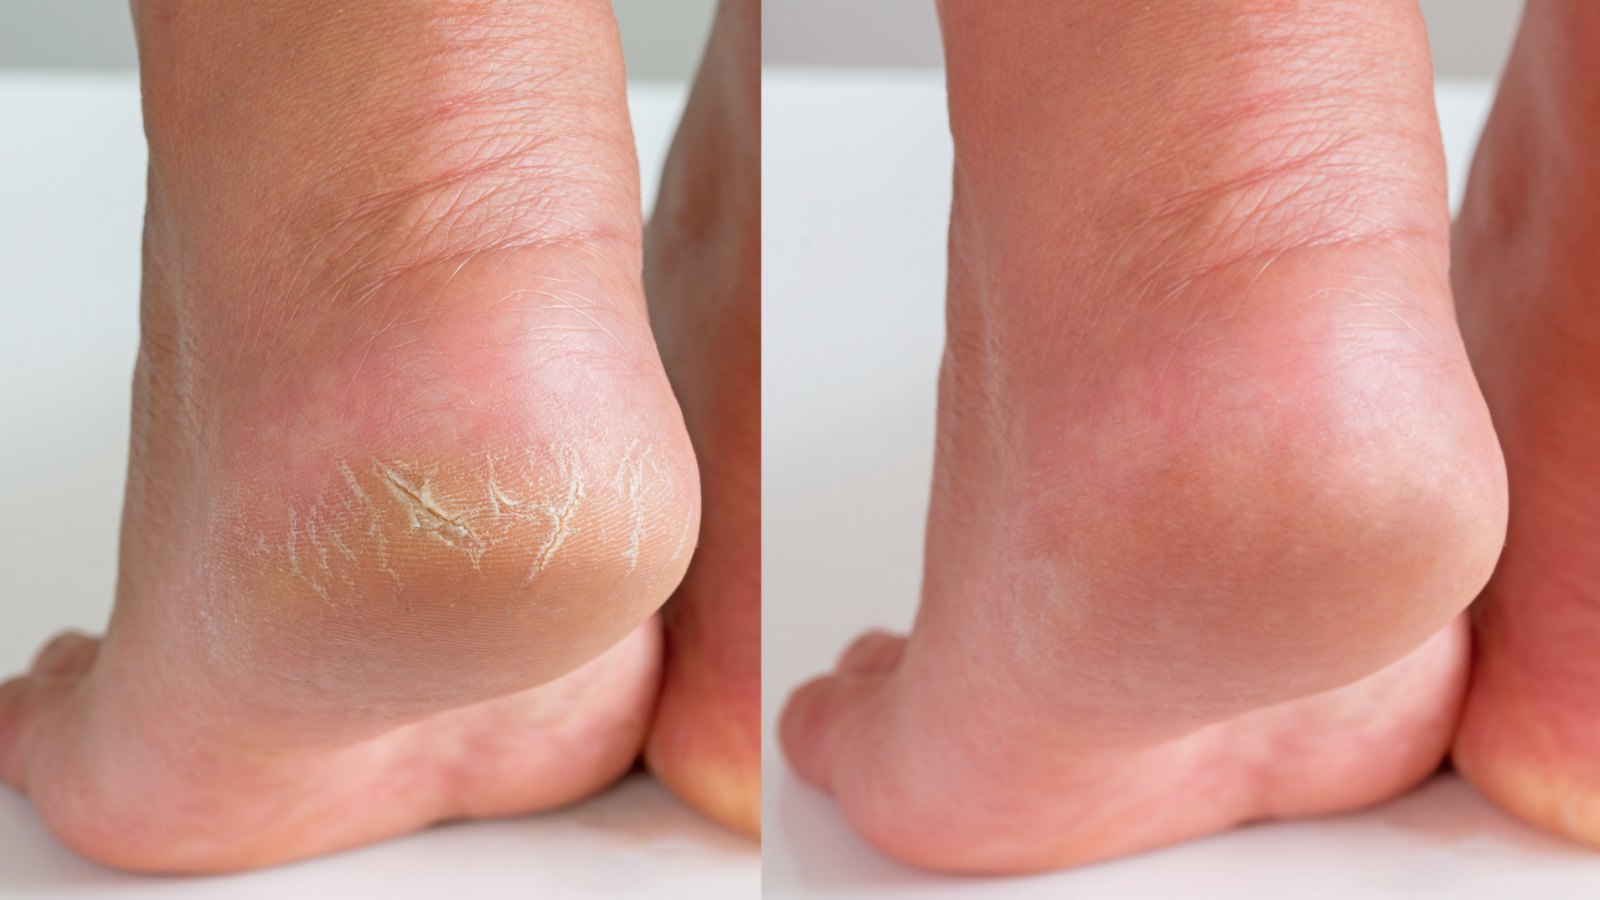 https://www.usmagazine.com/wp-content/uploads/2022/07/Cracked-Feet-Before-After.jpg?w=1600&h=900&crop=1&quality=86&strip=all